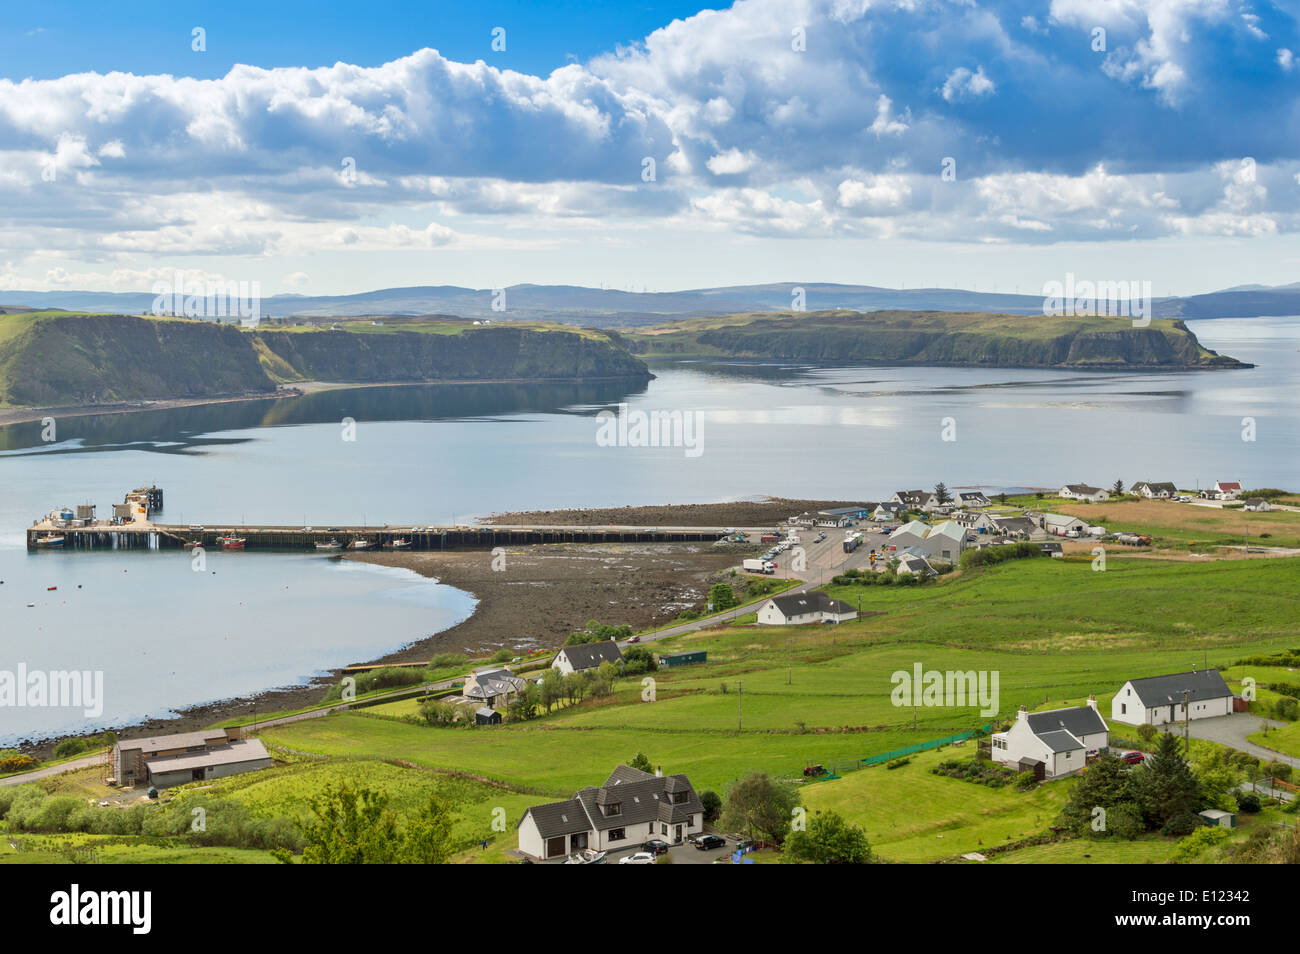 UIG VILLAGE AND THE FERRY TERMINAL ON THE ISLE OF SKYE SCOTLAND Stock Photo